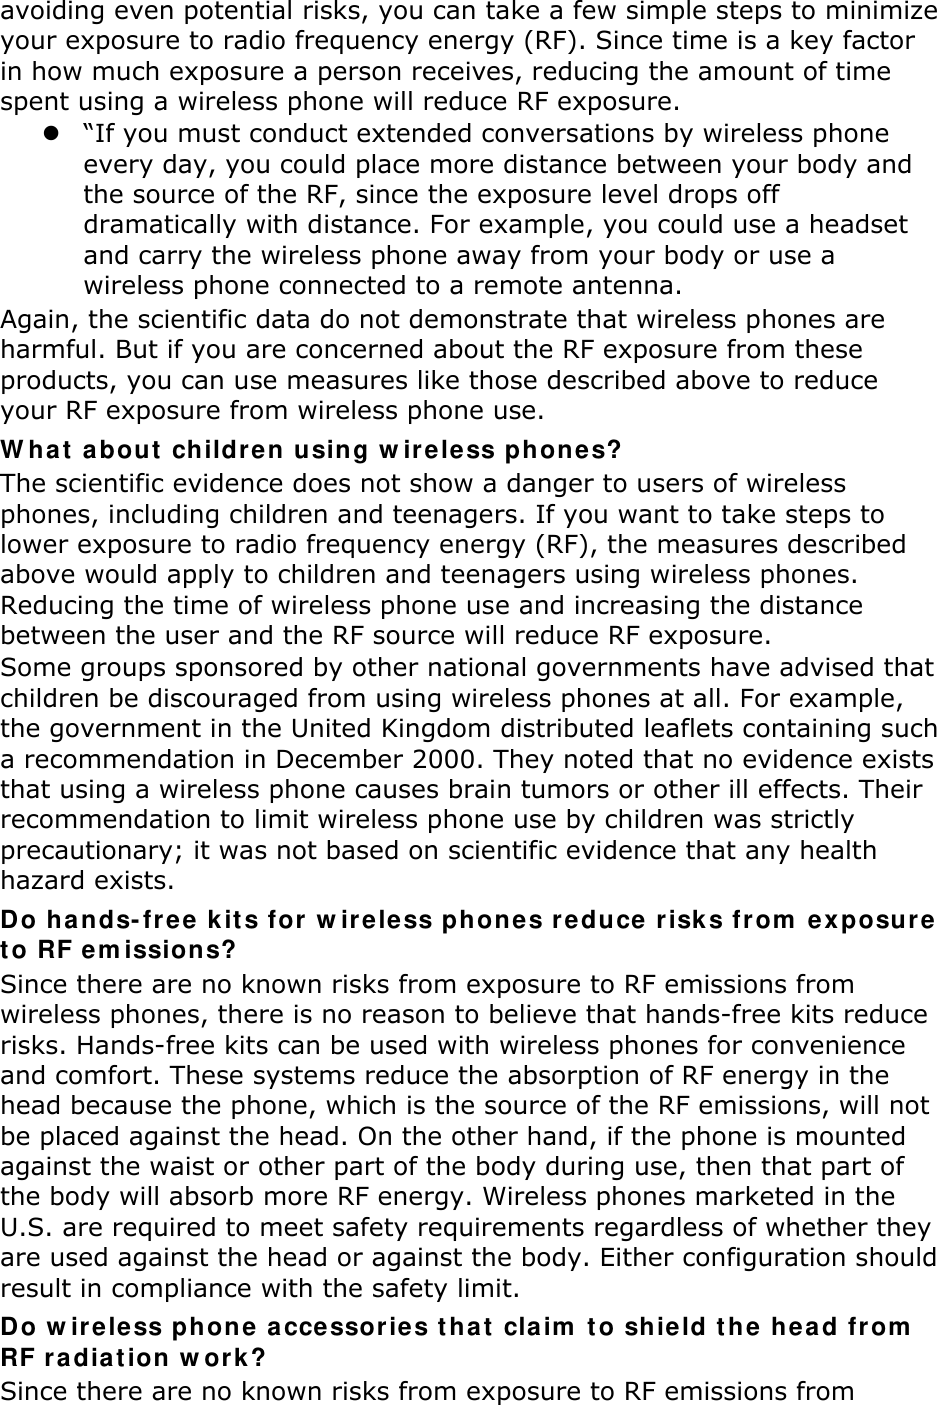 avoiding even potential risks, you can take a few simple steps to minimize your exposure to radio frequency energy (RF). Since time is a key factor in how much exposure a person receives, reducing the amount of time spent using a wireless phone will reduce RF exposure.  “If you must conduct extended conversations by wireless phone every day, you could place more distance between your body and the source of the RF, since the exposure level drops off dramatically with distance. For example, you could use a headset and carry the wireless phone away from your body or use a wireless phone connected to a remote antenna. Again, the scientific data do not demonstrate that wireless phones are harmful. But if you are concerned about the RF exposure from these products, you can use measures like those described above to reduce your RF exposure from wireless phone use. W h a t  about  children using w ir eless phones? The scientific evidence does not show a danger to users of wireless phones, including children and teenagers. If you want to take steps to lower exposure to radio frequency energy (RF), the measures described above would apply to children and teenagers using wireless phones. Reducing the time of wireless phone use and increasing the distance between the user and the RF source will reduce RF exposure. Some groups sponsored by other national governments have advised that children be discouraged from using wireless phones at all. For example, the government in the United Kingdom distributed leaflets containing such a recommendation in December 2000. They noted that no evidence exists that using a wireless phone causes brain tumors or other ill effects. Their recommendation to limit wireless phone use by children was strictly precautionary; it was not based on scientific evidence that any health hazard exists.   Do ha nds-fr e e  kit s for  w ir eless ph on e s r e duce  risk s fr om  e x posur e  t o RF em issions? Since there are no known risks from exposure to RF emissions from wireless phones, there is no reason to believe that hands-free kits reduce risks. Hands-free kits can be used with wireless phones for convenience and comfort. These systems reduce the absorption of RF energy in the head because the phone, which is the source of the RF emissions, will not be placed against the head. On the other hand, if the phone is mounted against the waist or other part of the body during use, then that part of the body will absorb more RF energy. Wireless phones marketed in the U.S. are required to meet safety requirements regardless of whether they are used against the head or against the body. Either configuration should result in compliance with the safety limit. Do w ireless phone  acce ssories t hat  claim  t o shield t h e  hea d from  RF r a dia t ion w ork? Since there are no known risks from exposure to RF emissions from 